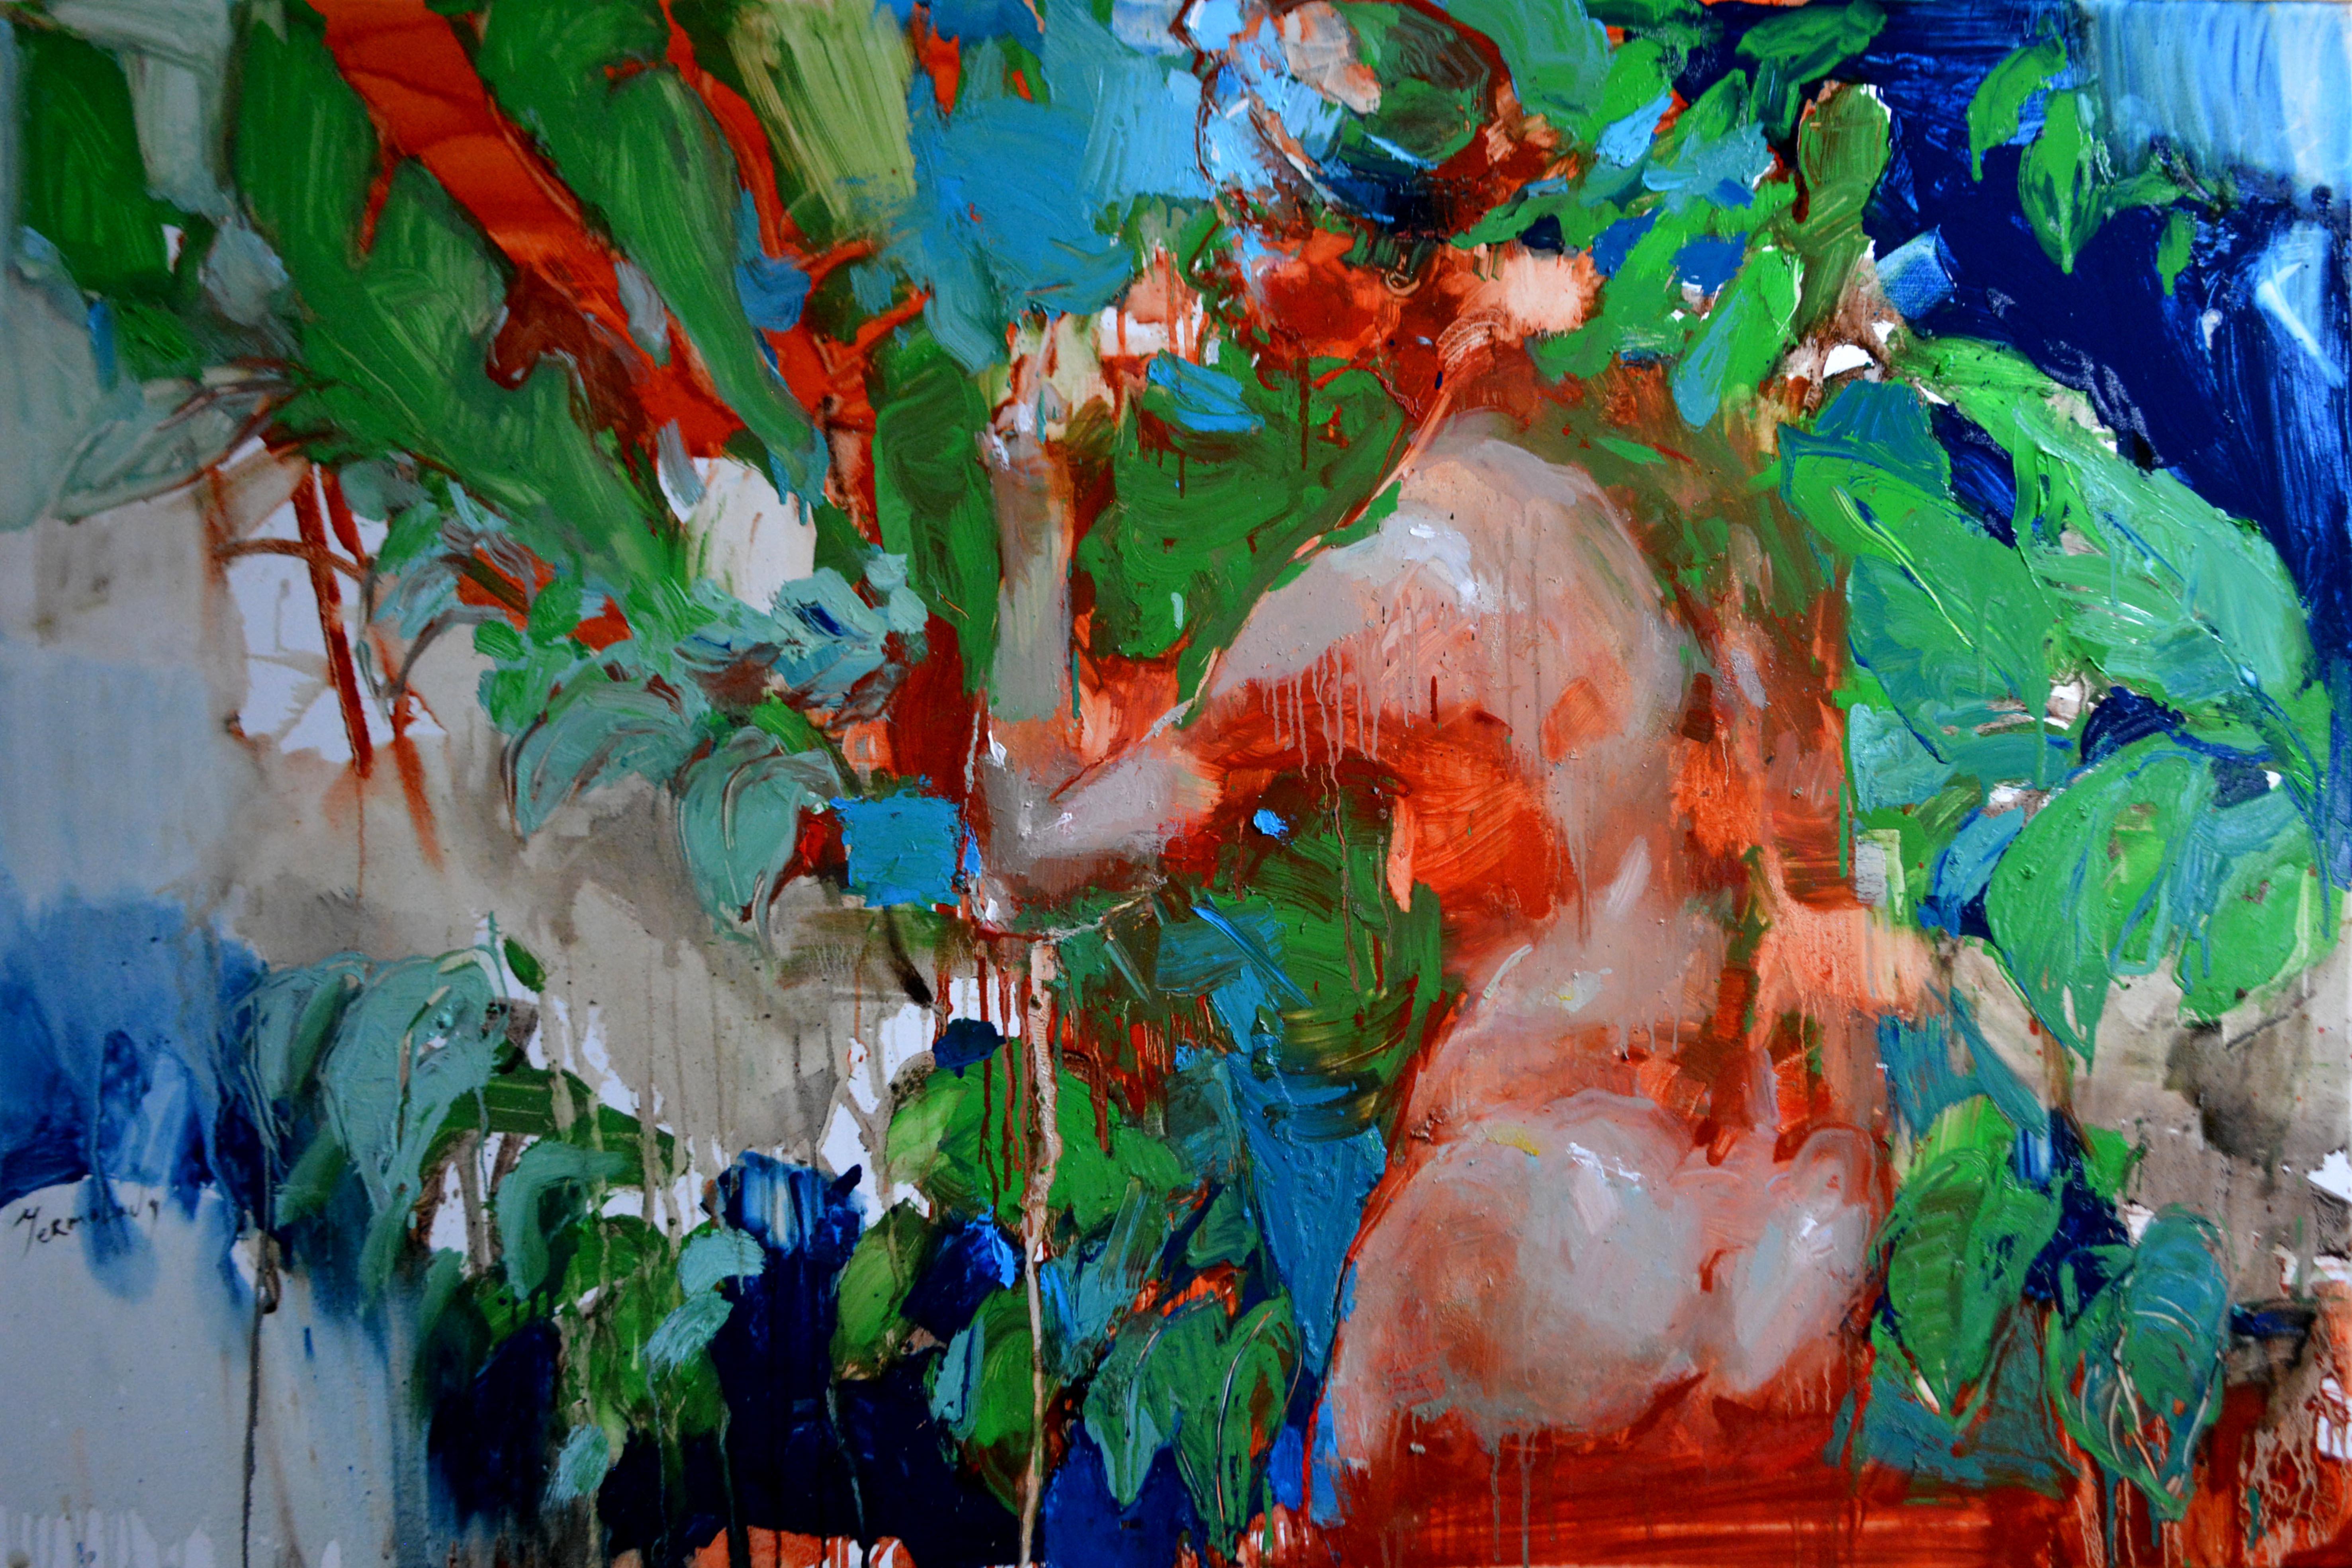 Villa the Private Pool-original abstract figurative painting-contemporary art 